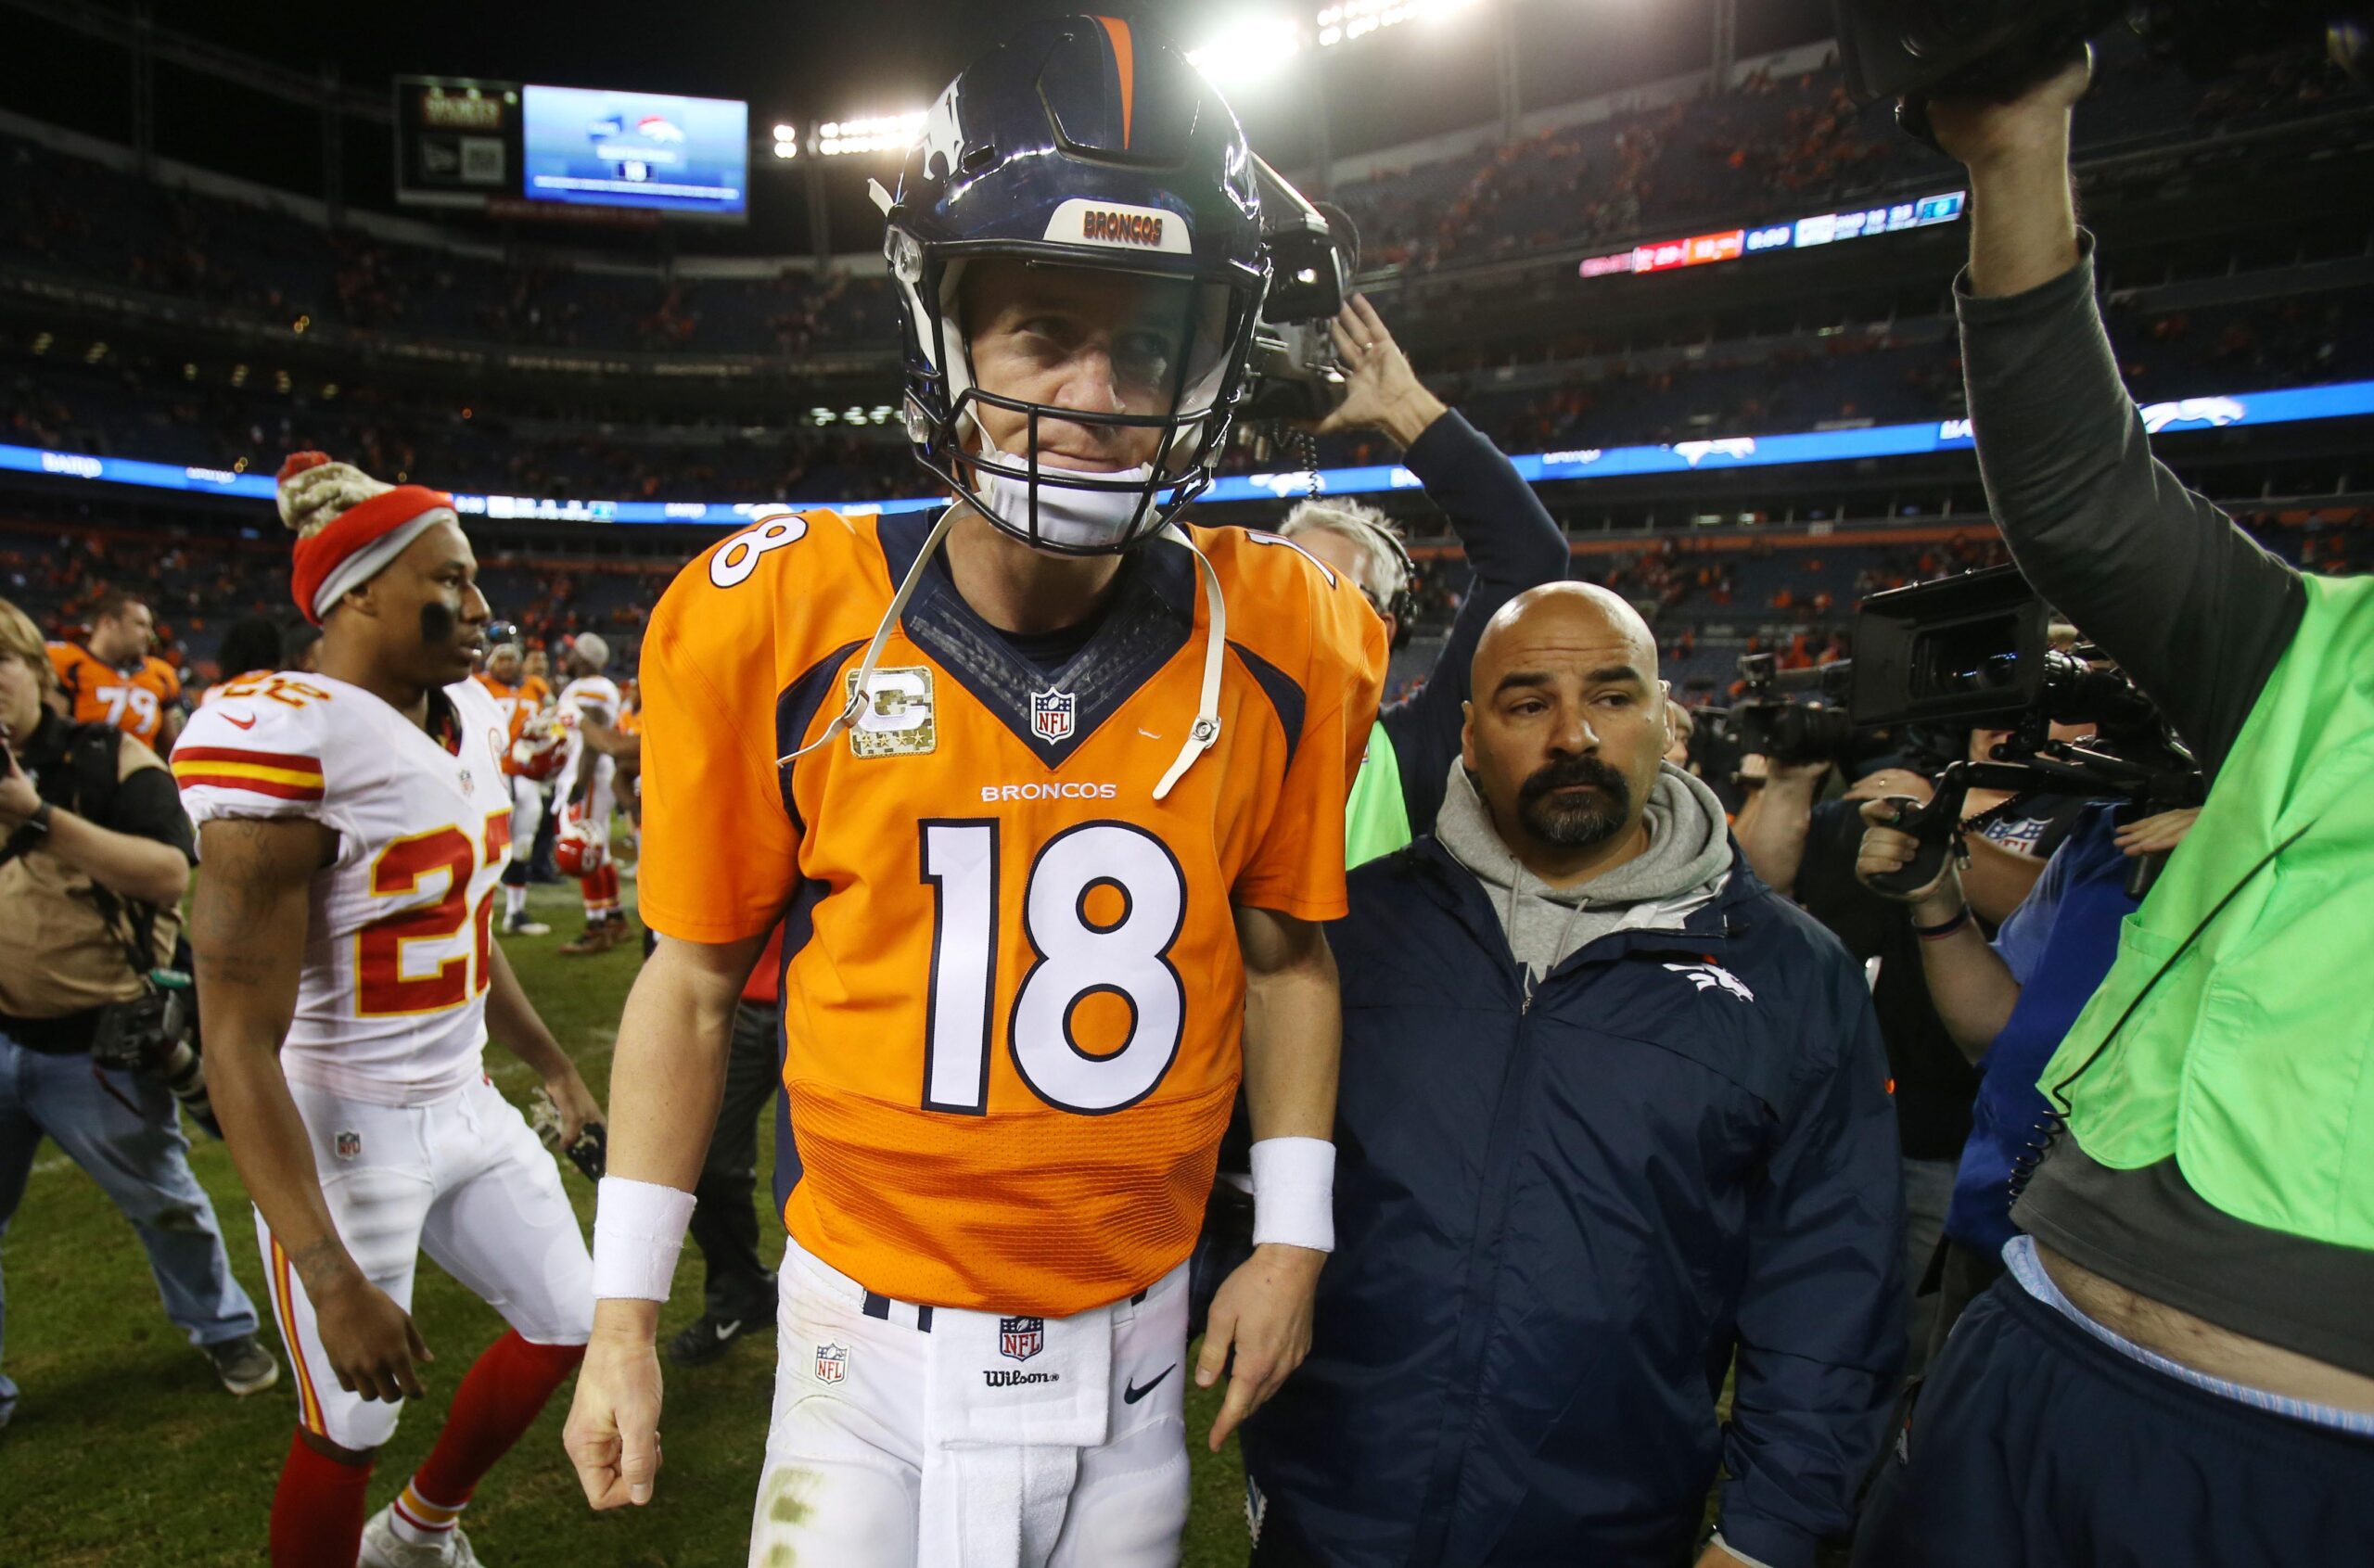 After dominating AFC West with Peyton Manning, Broncos are 12-32 since QB’s retirement